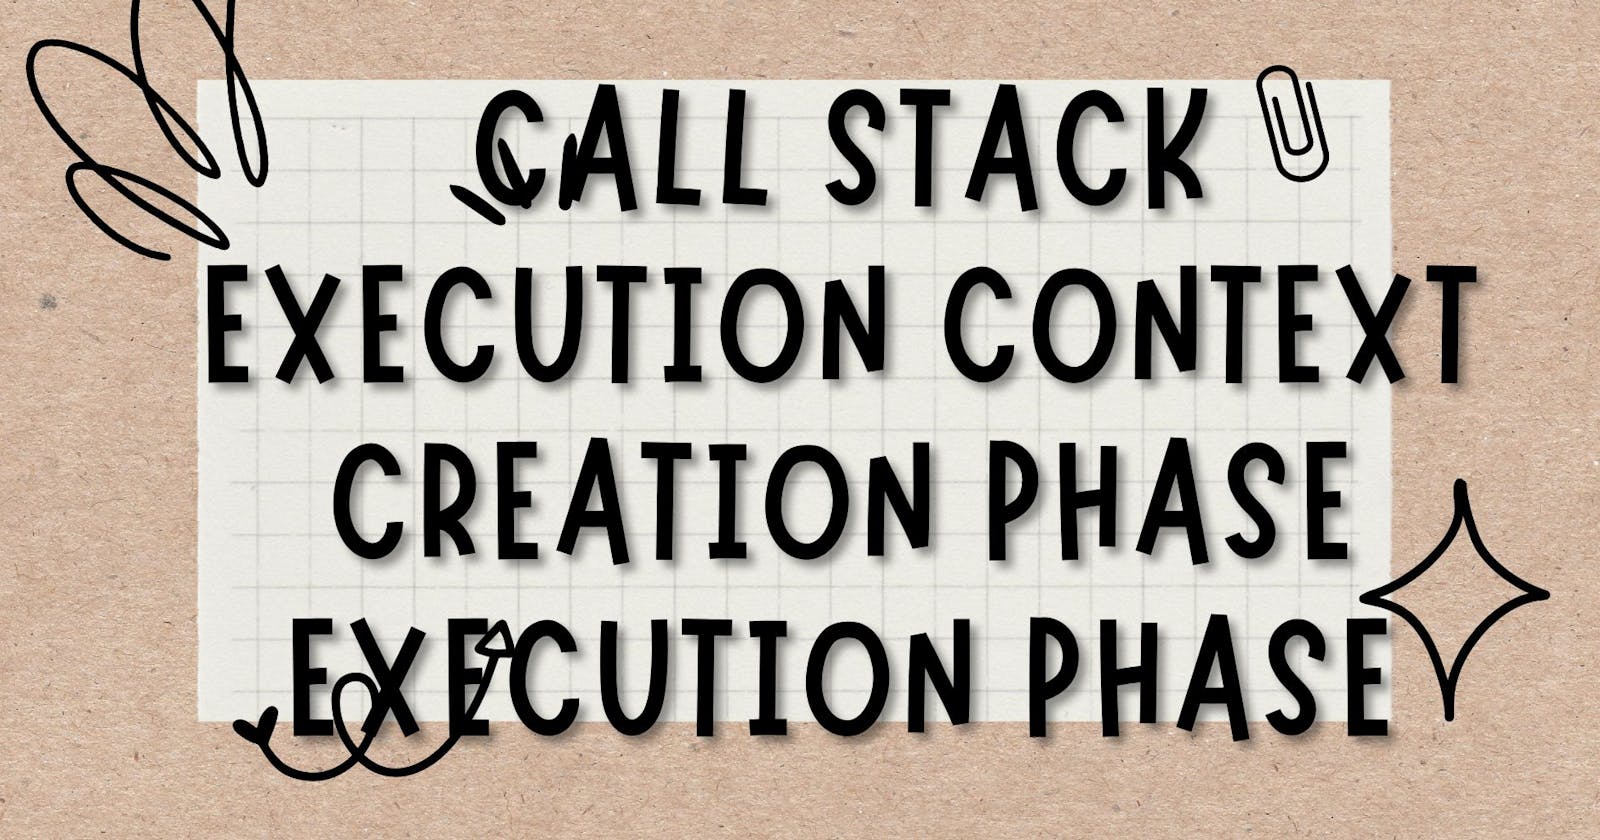 JavaScript Interview Preparation Cheat-Sheet:  Execution context, call stack, creation phase